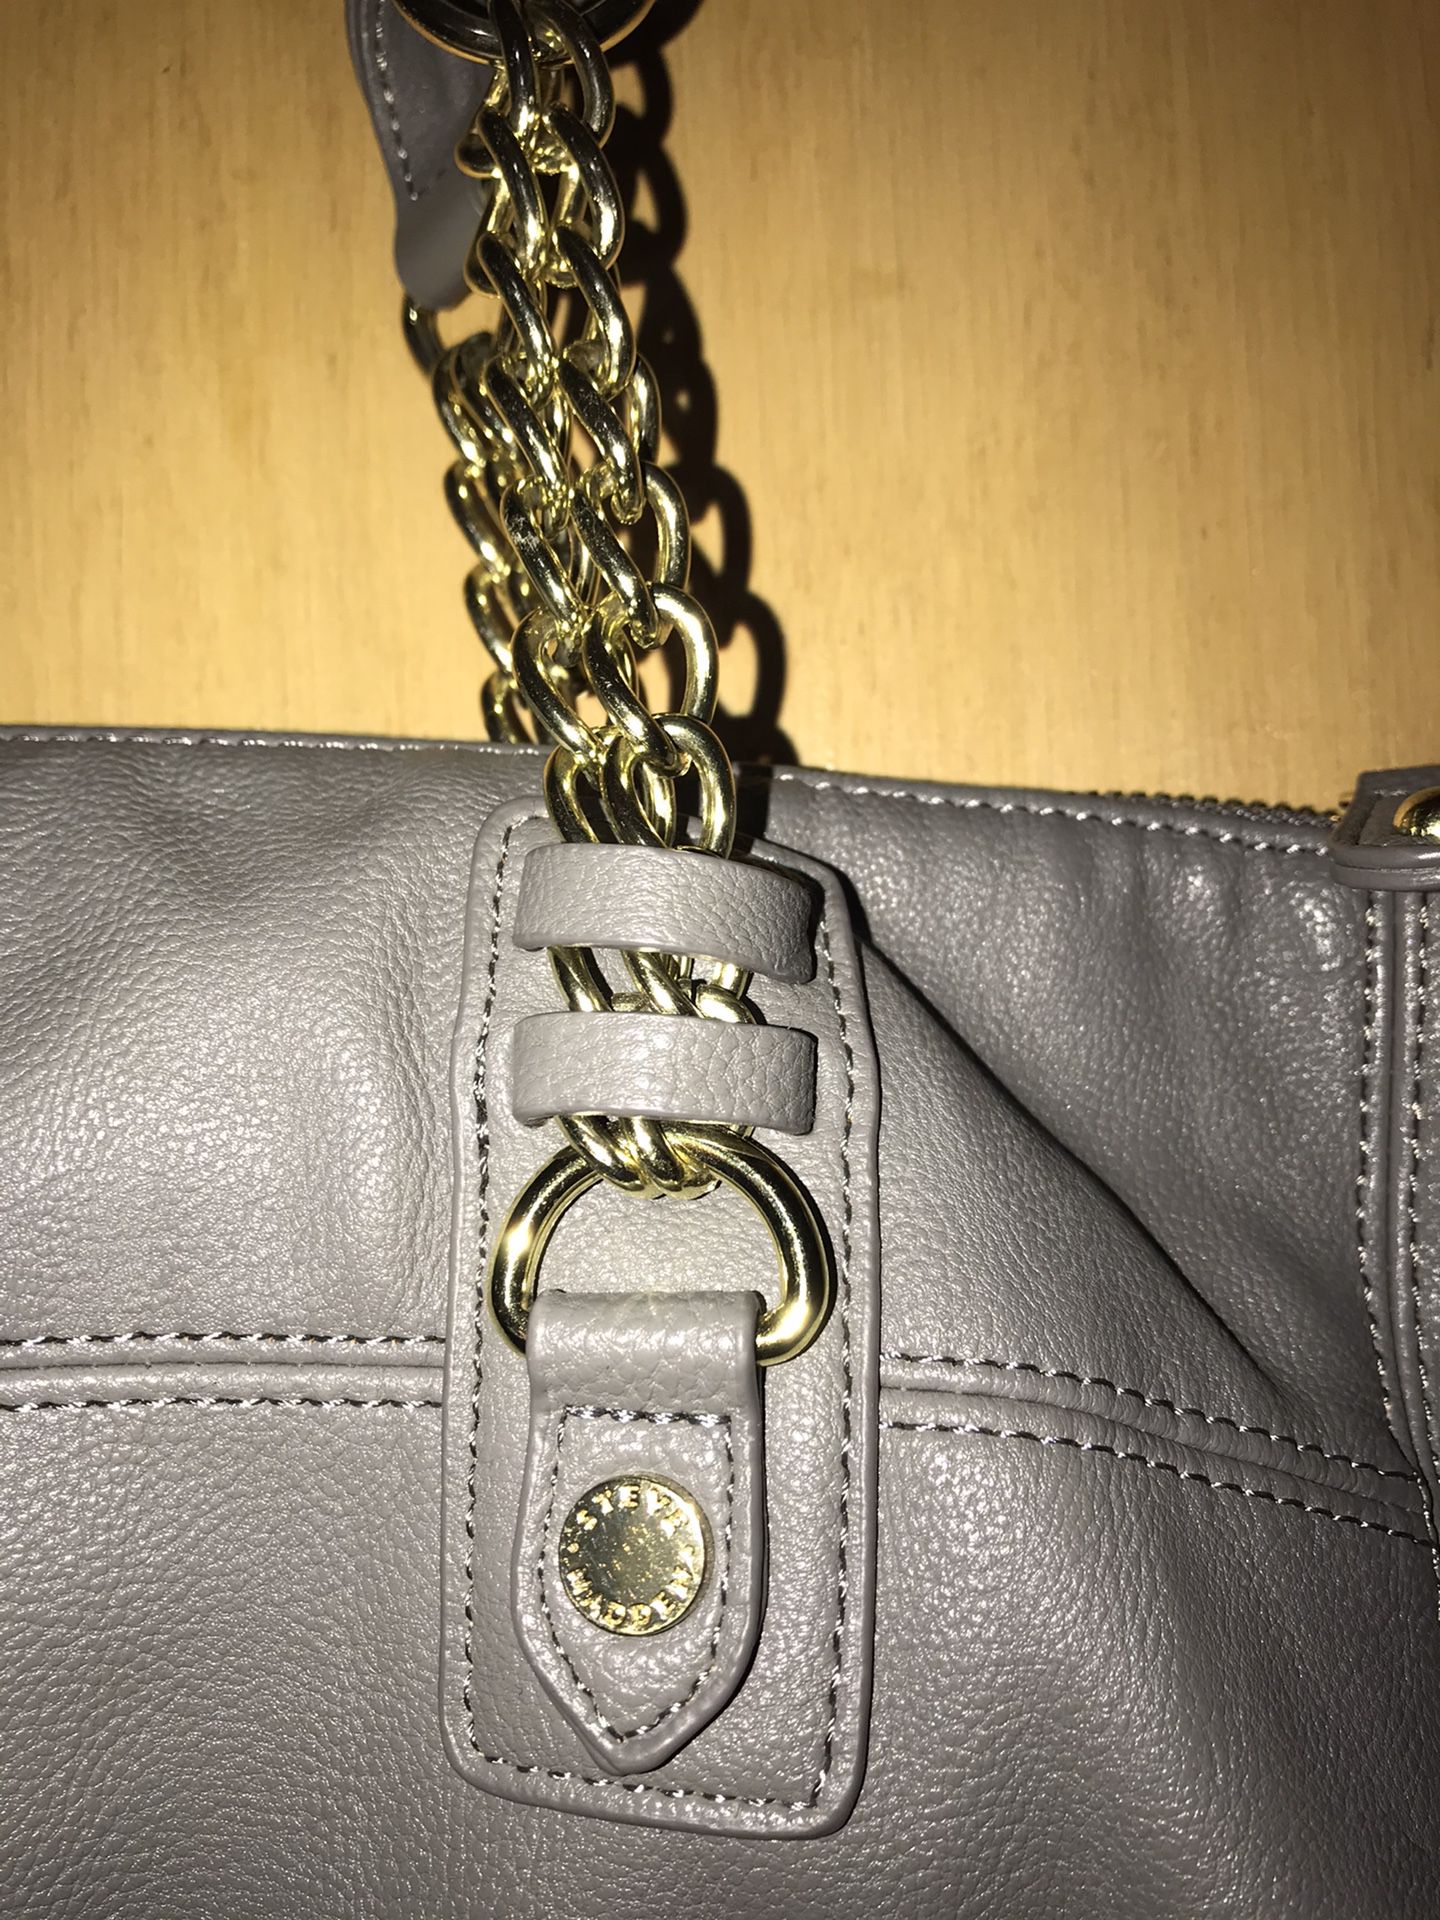 Steve Madden Bag for Sale in Chicago, IL - OfferUp